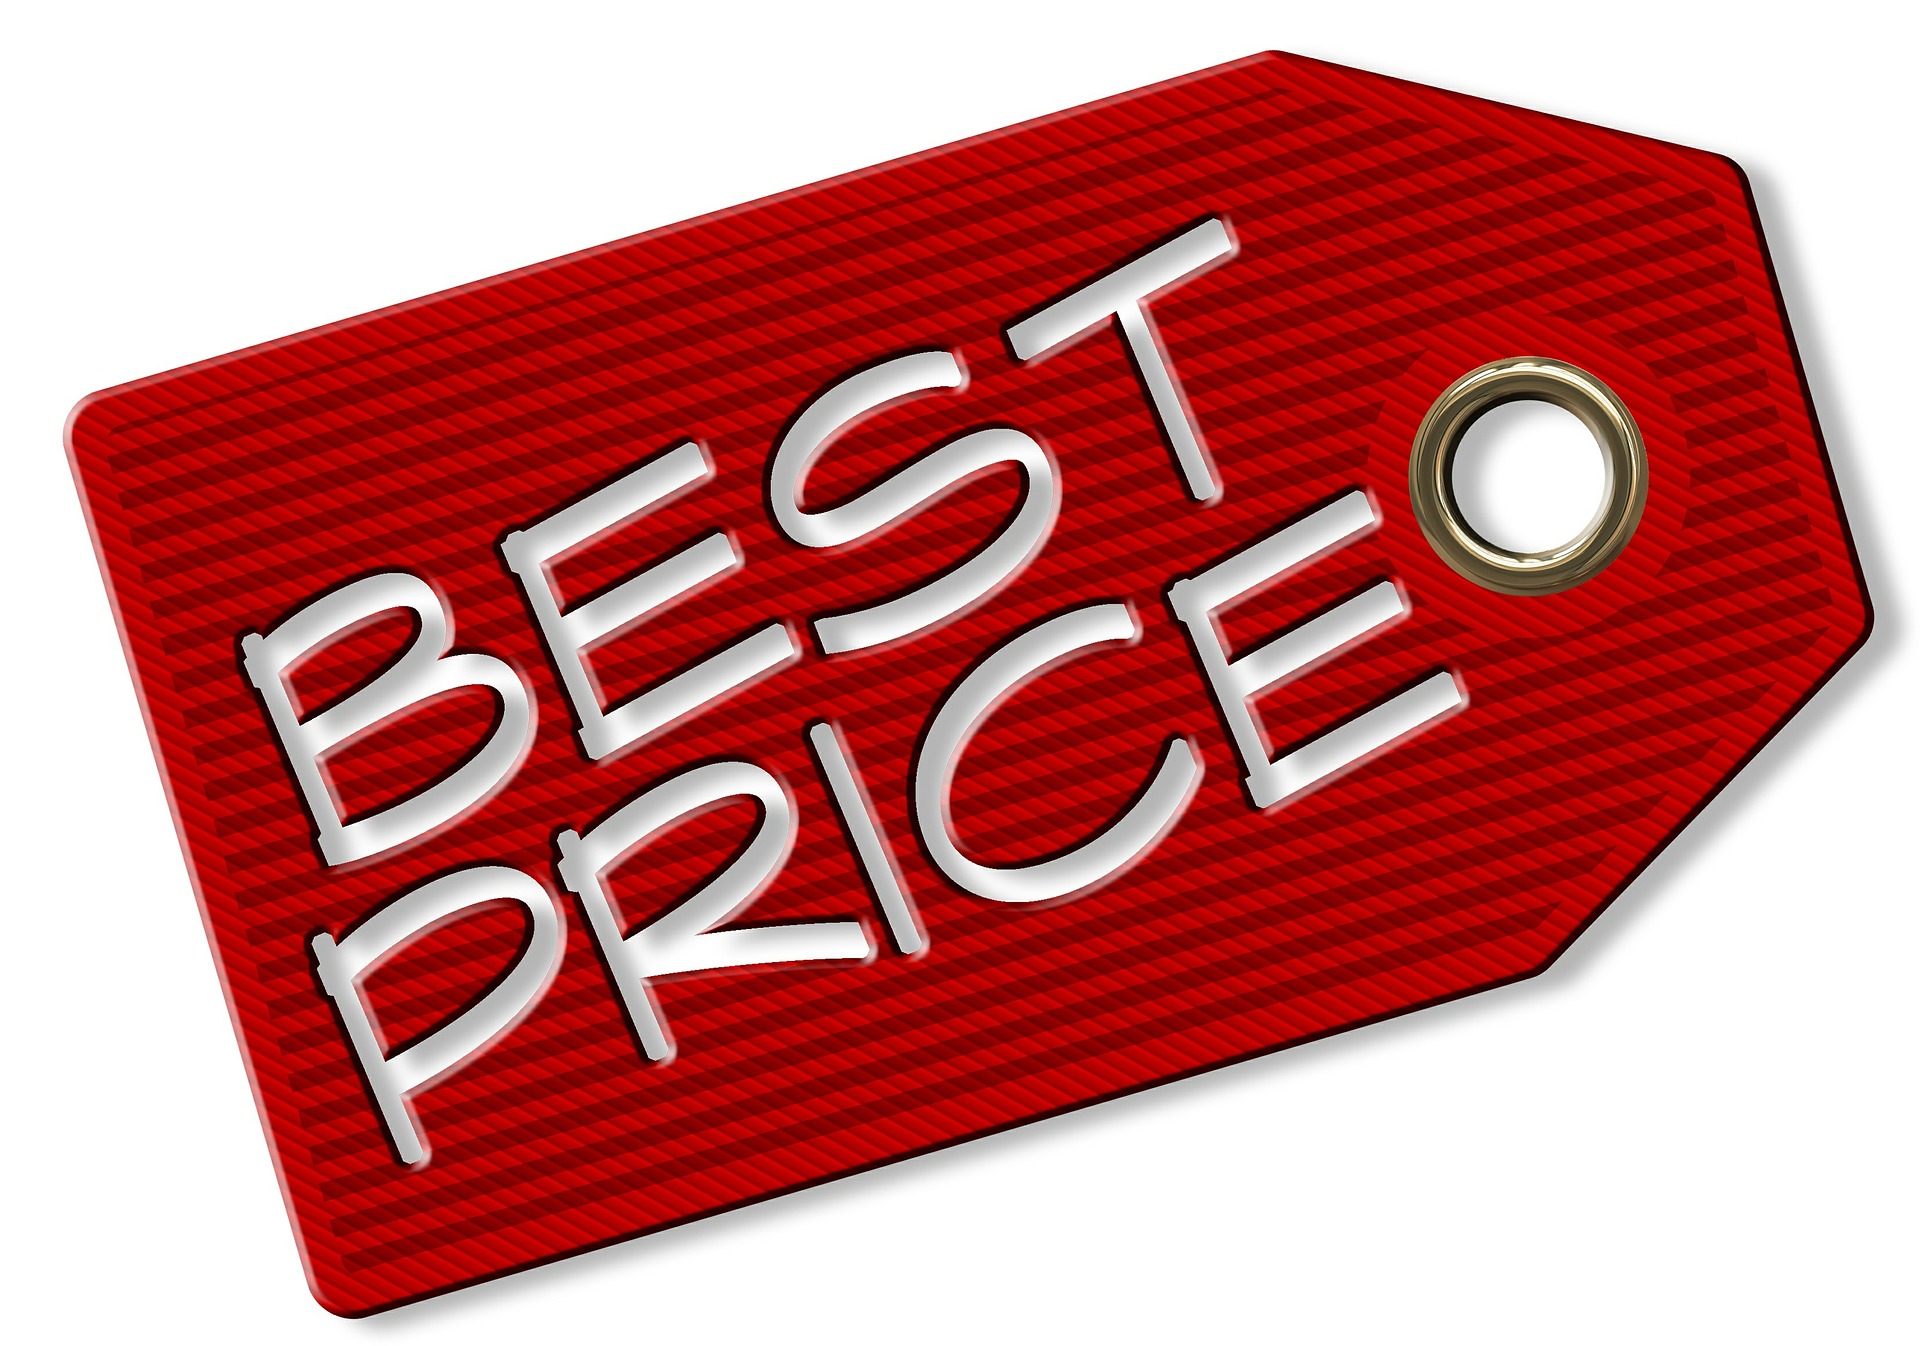 An image showing best price tag